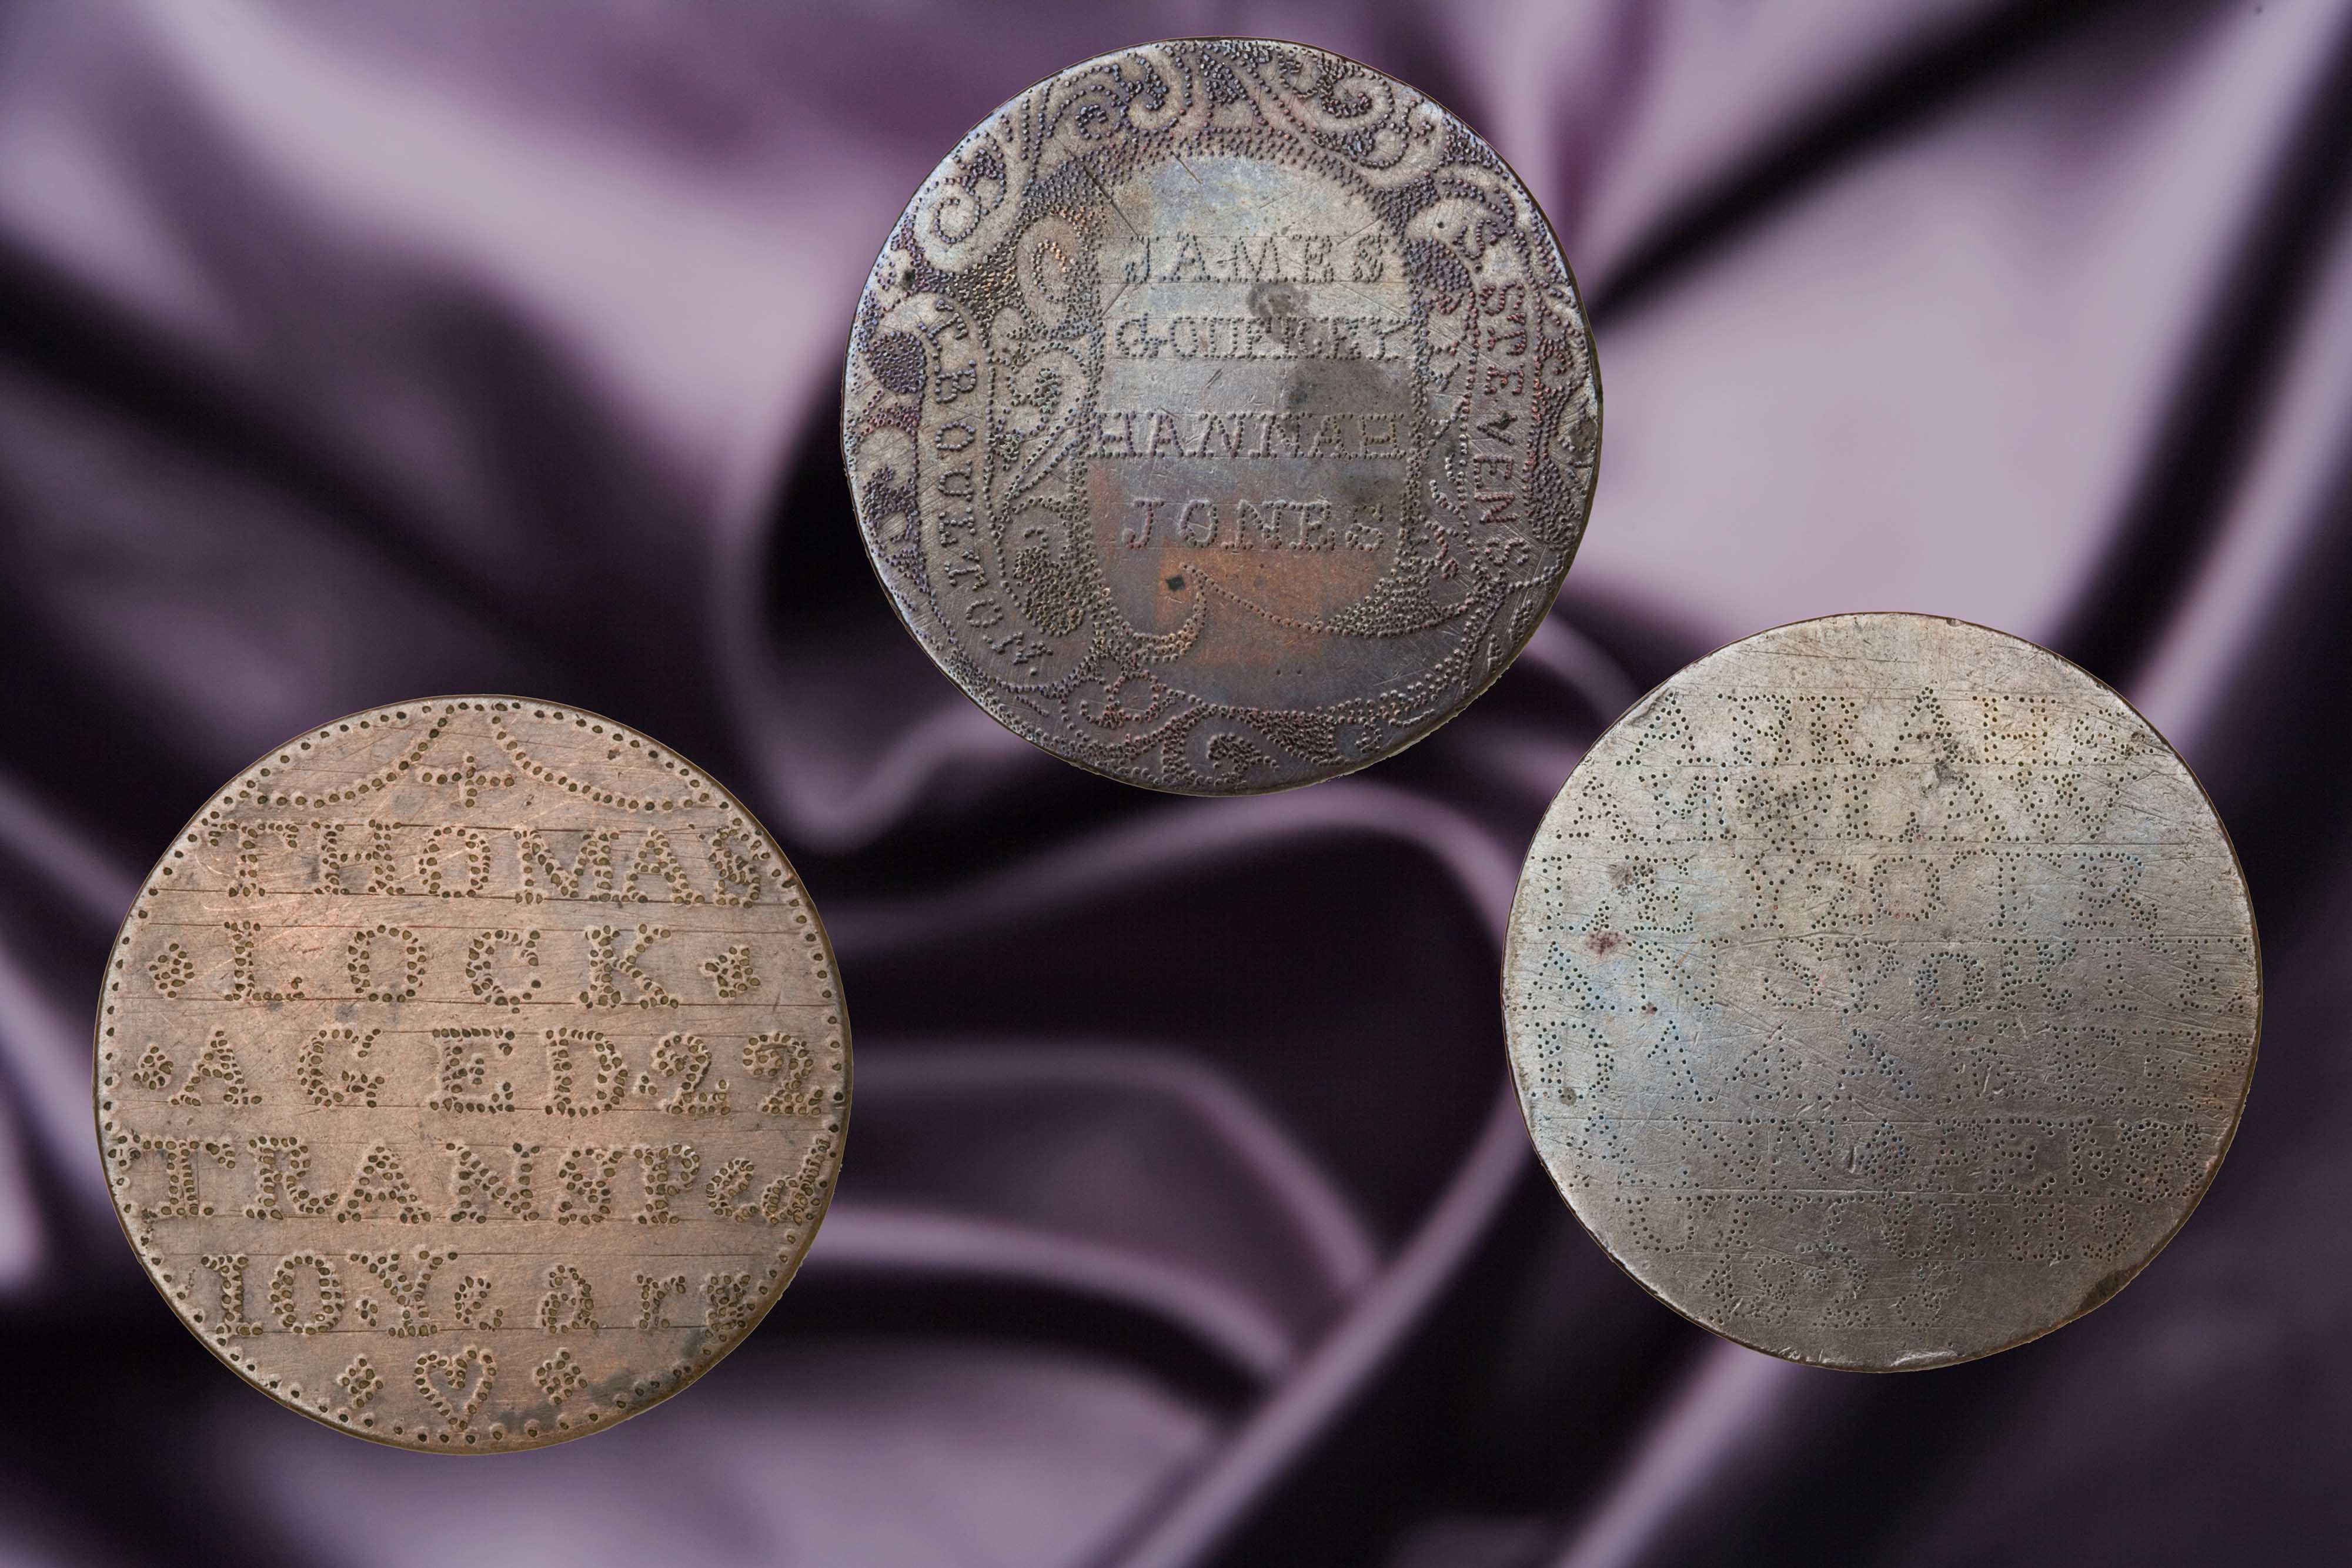 Convict love tokens. Small mementos were made from coins for the families of transported convicts